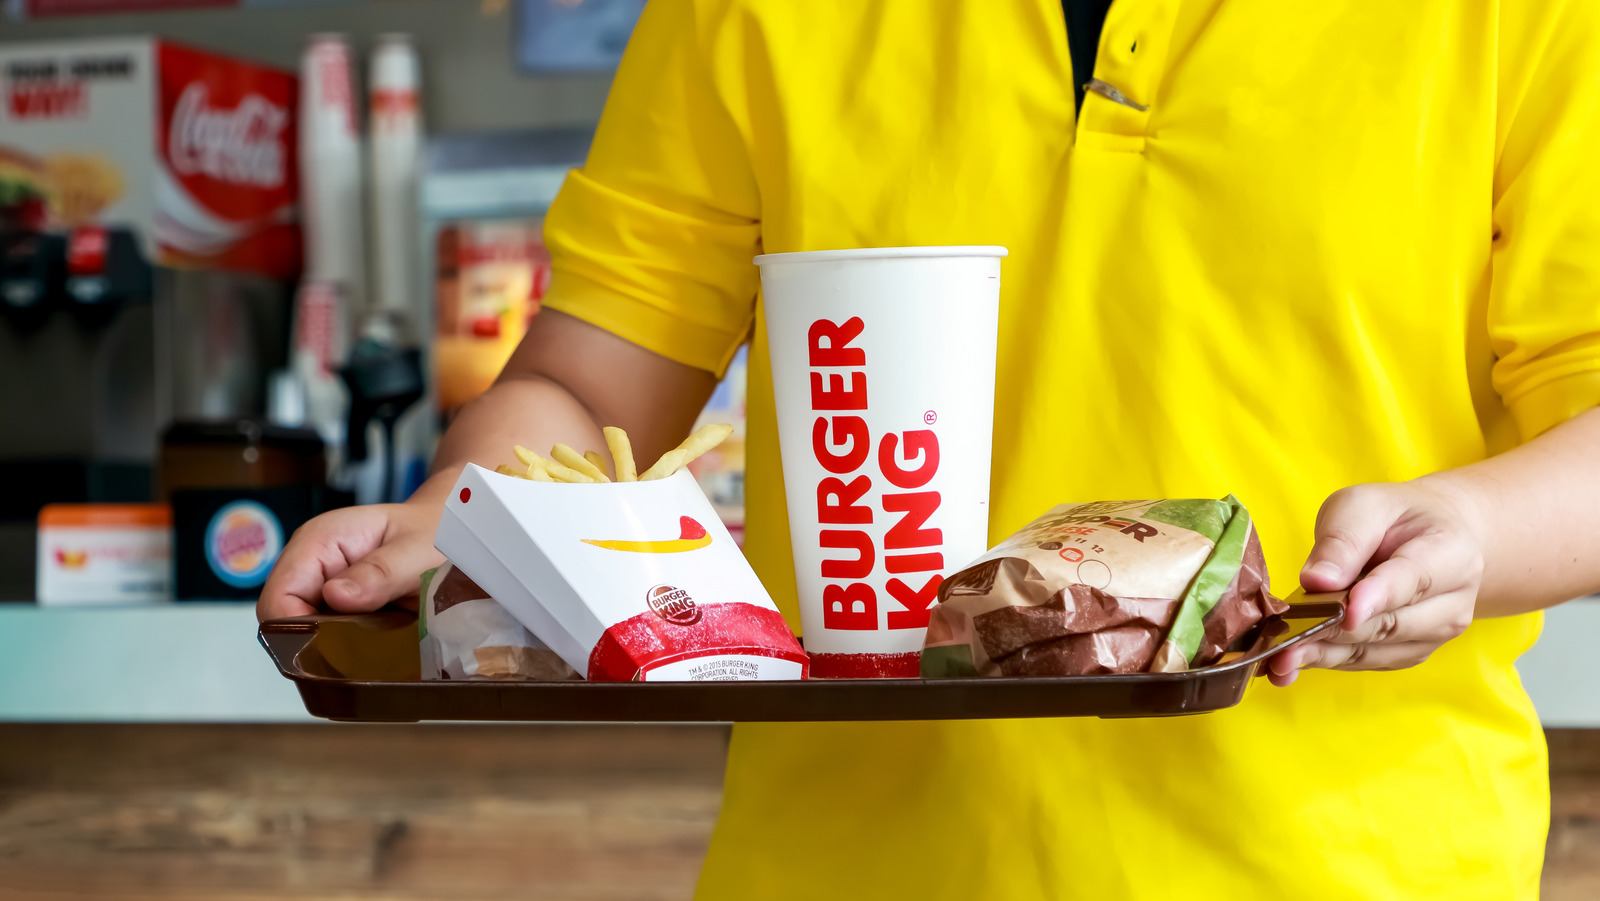 https://www.mashed.com/img/gallery/13-signs-burger-king-is-struggling-to-stay-in-business/l-intro-1689259289.jpg